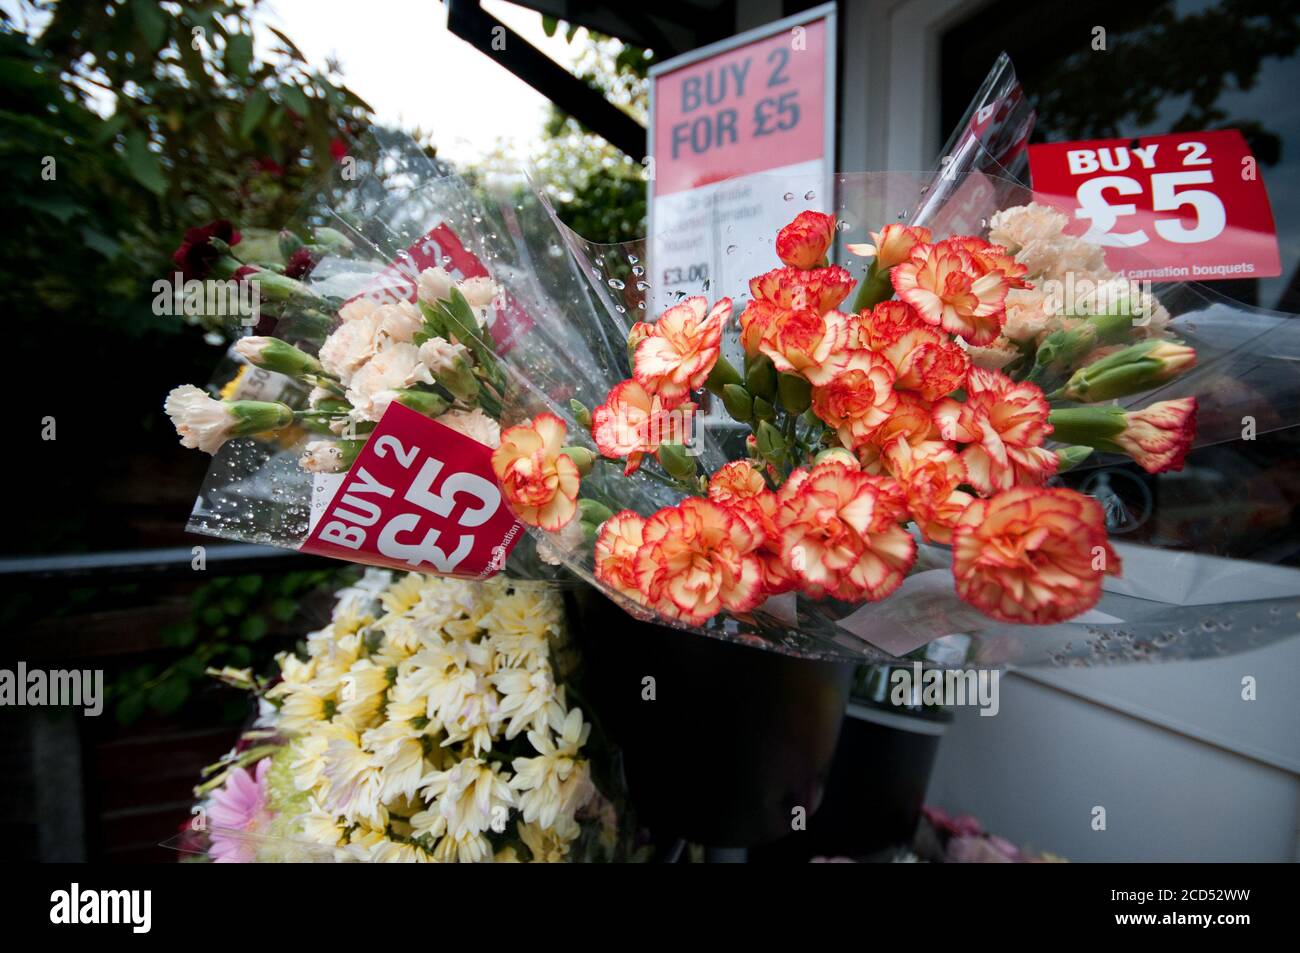 Fresh Cut Flowers for Sale Stock Photo